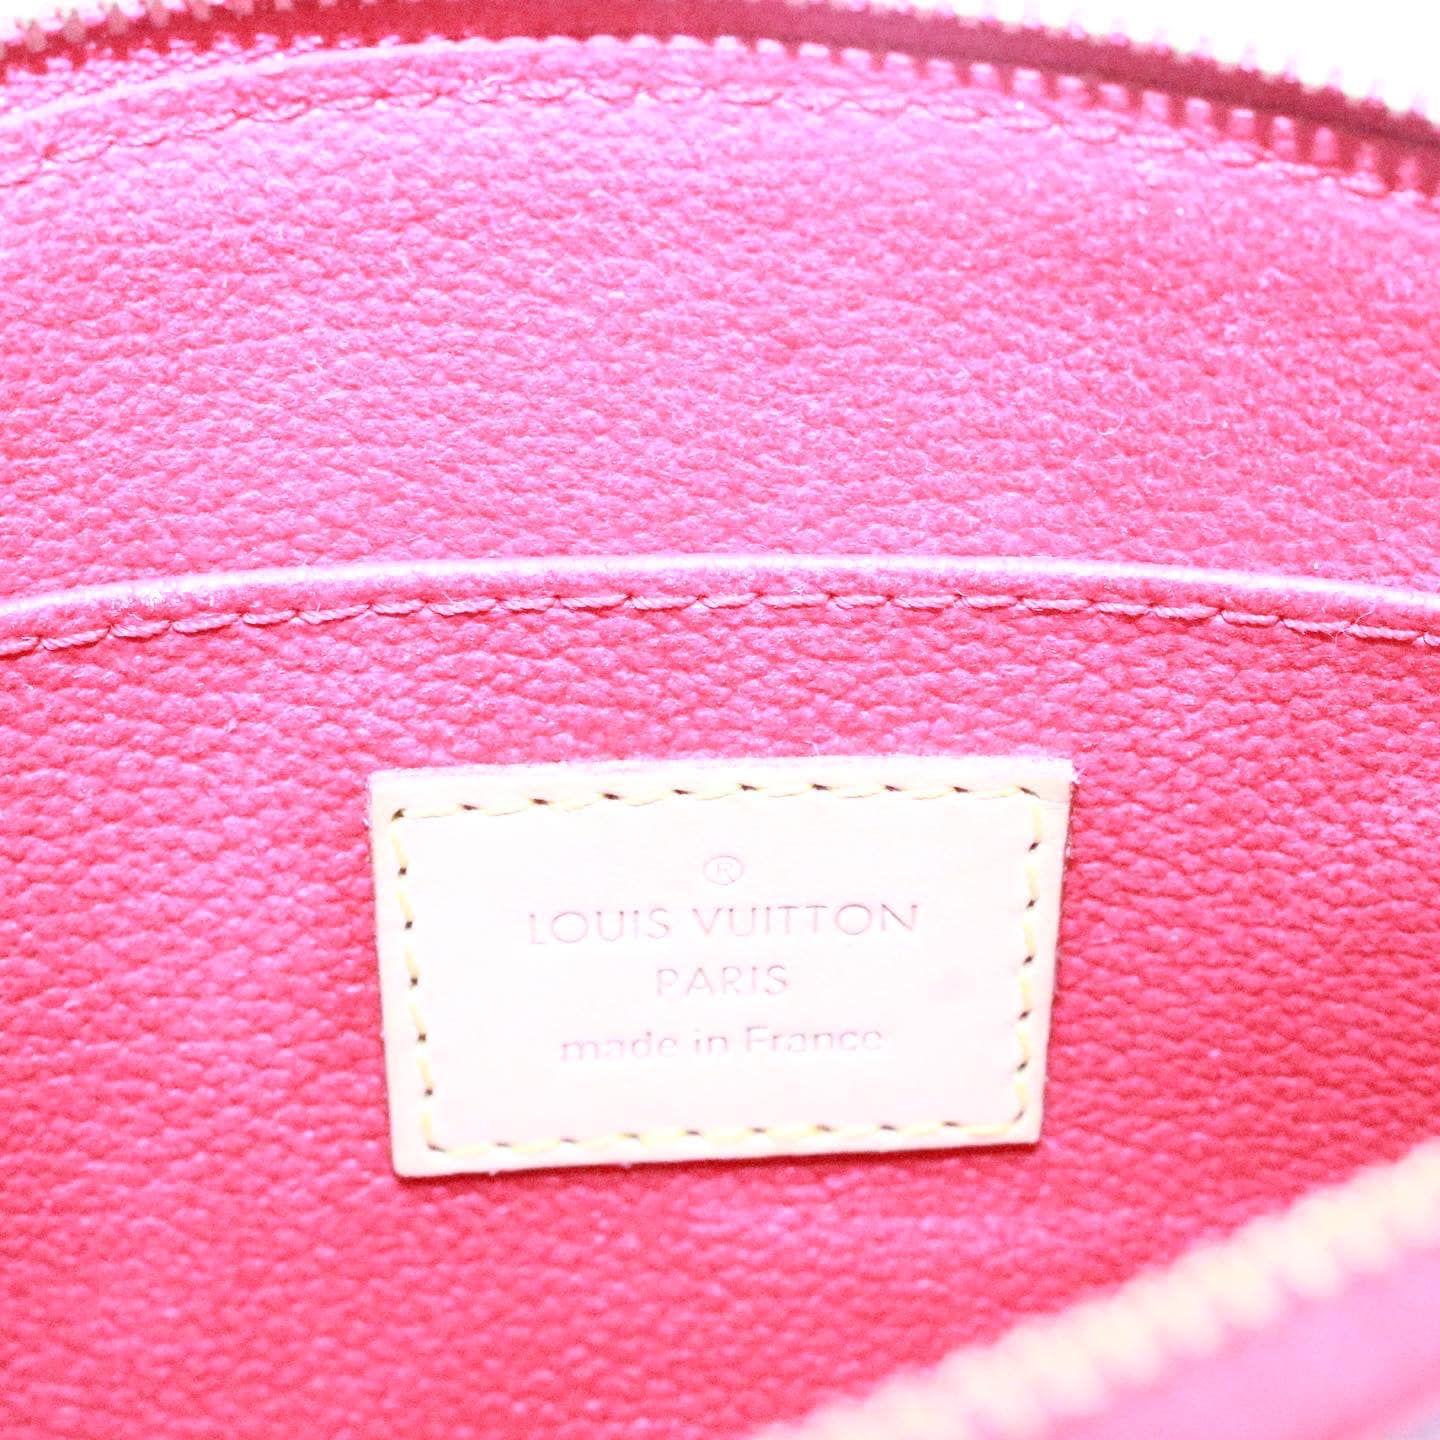 red and pink louis vuitton bag